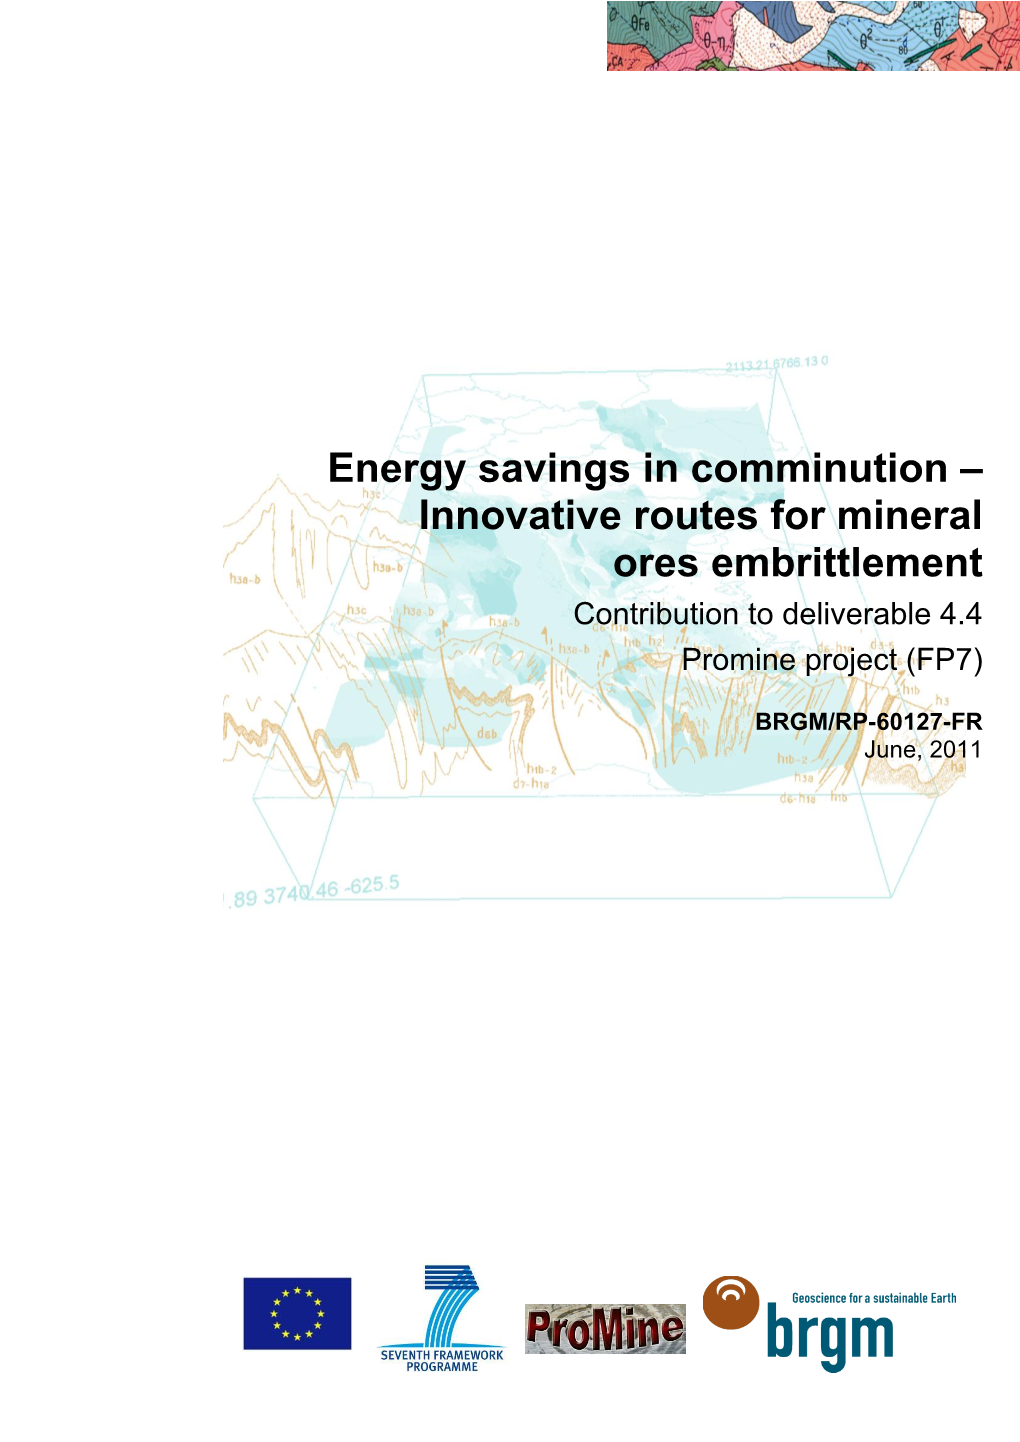 Energy Savings in Comminution – Innovative Routes for Mineral Ores Embrittlement Contribution to Deliverable 4.4